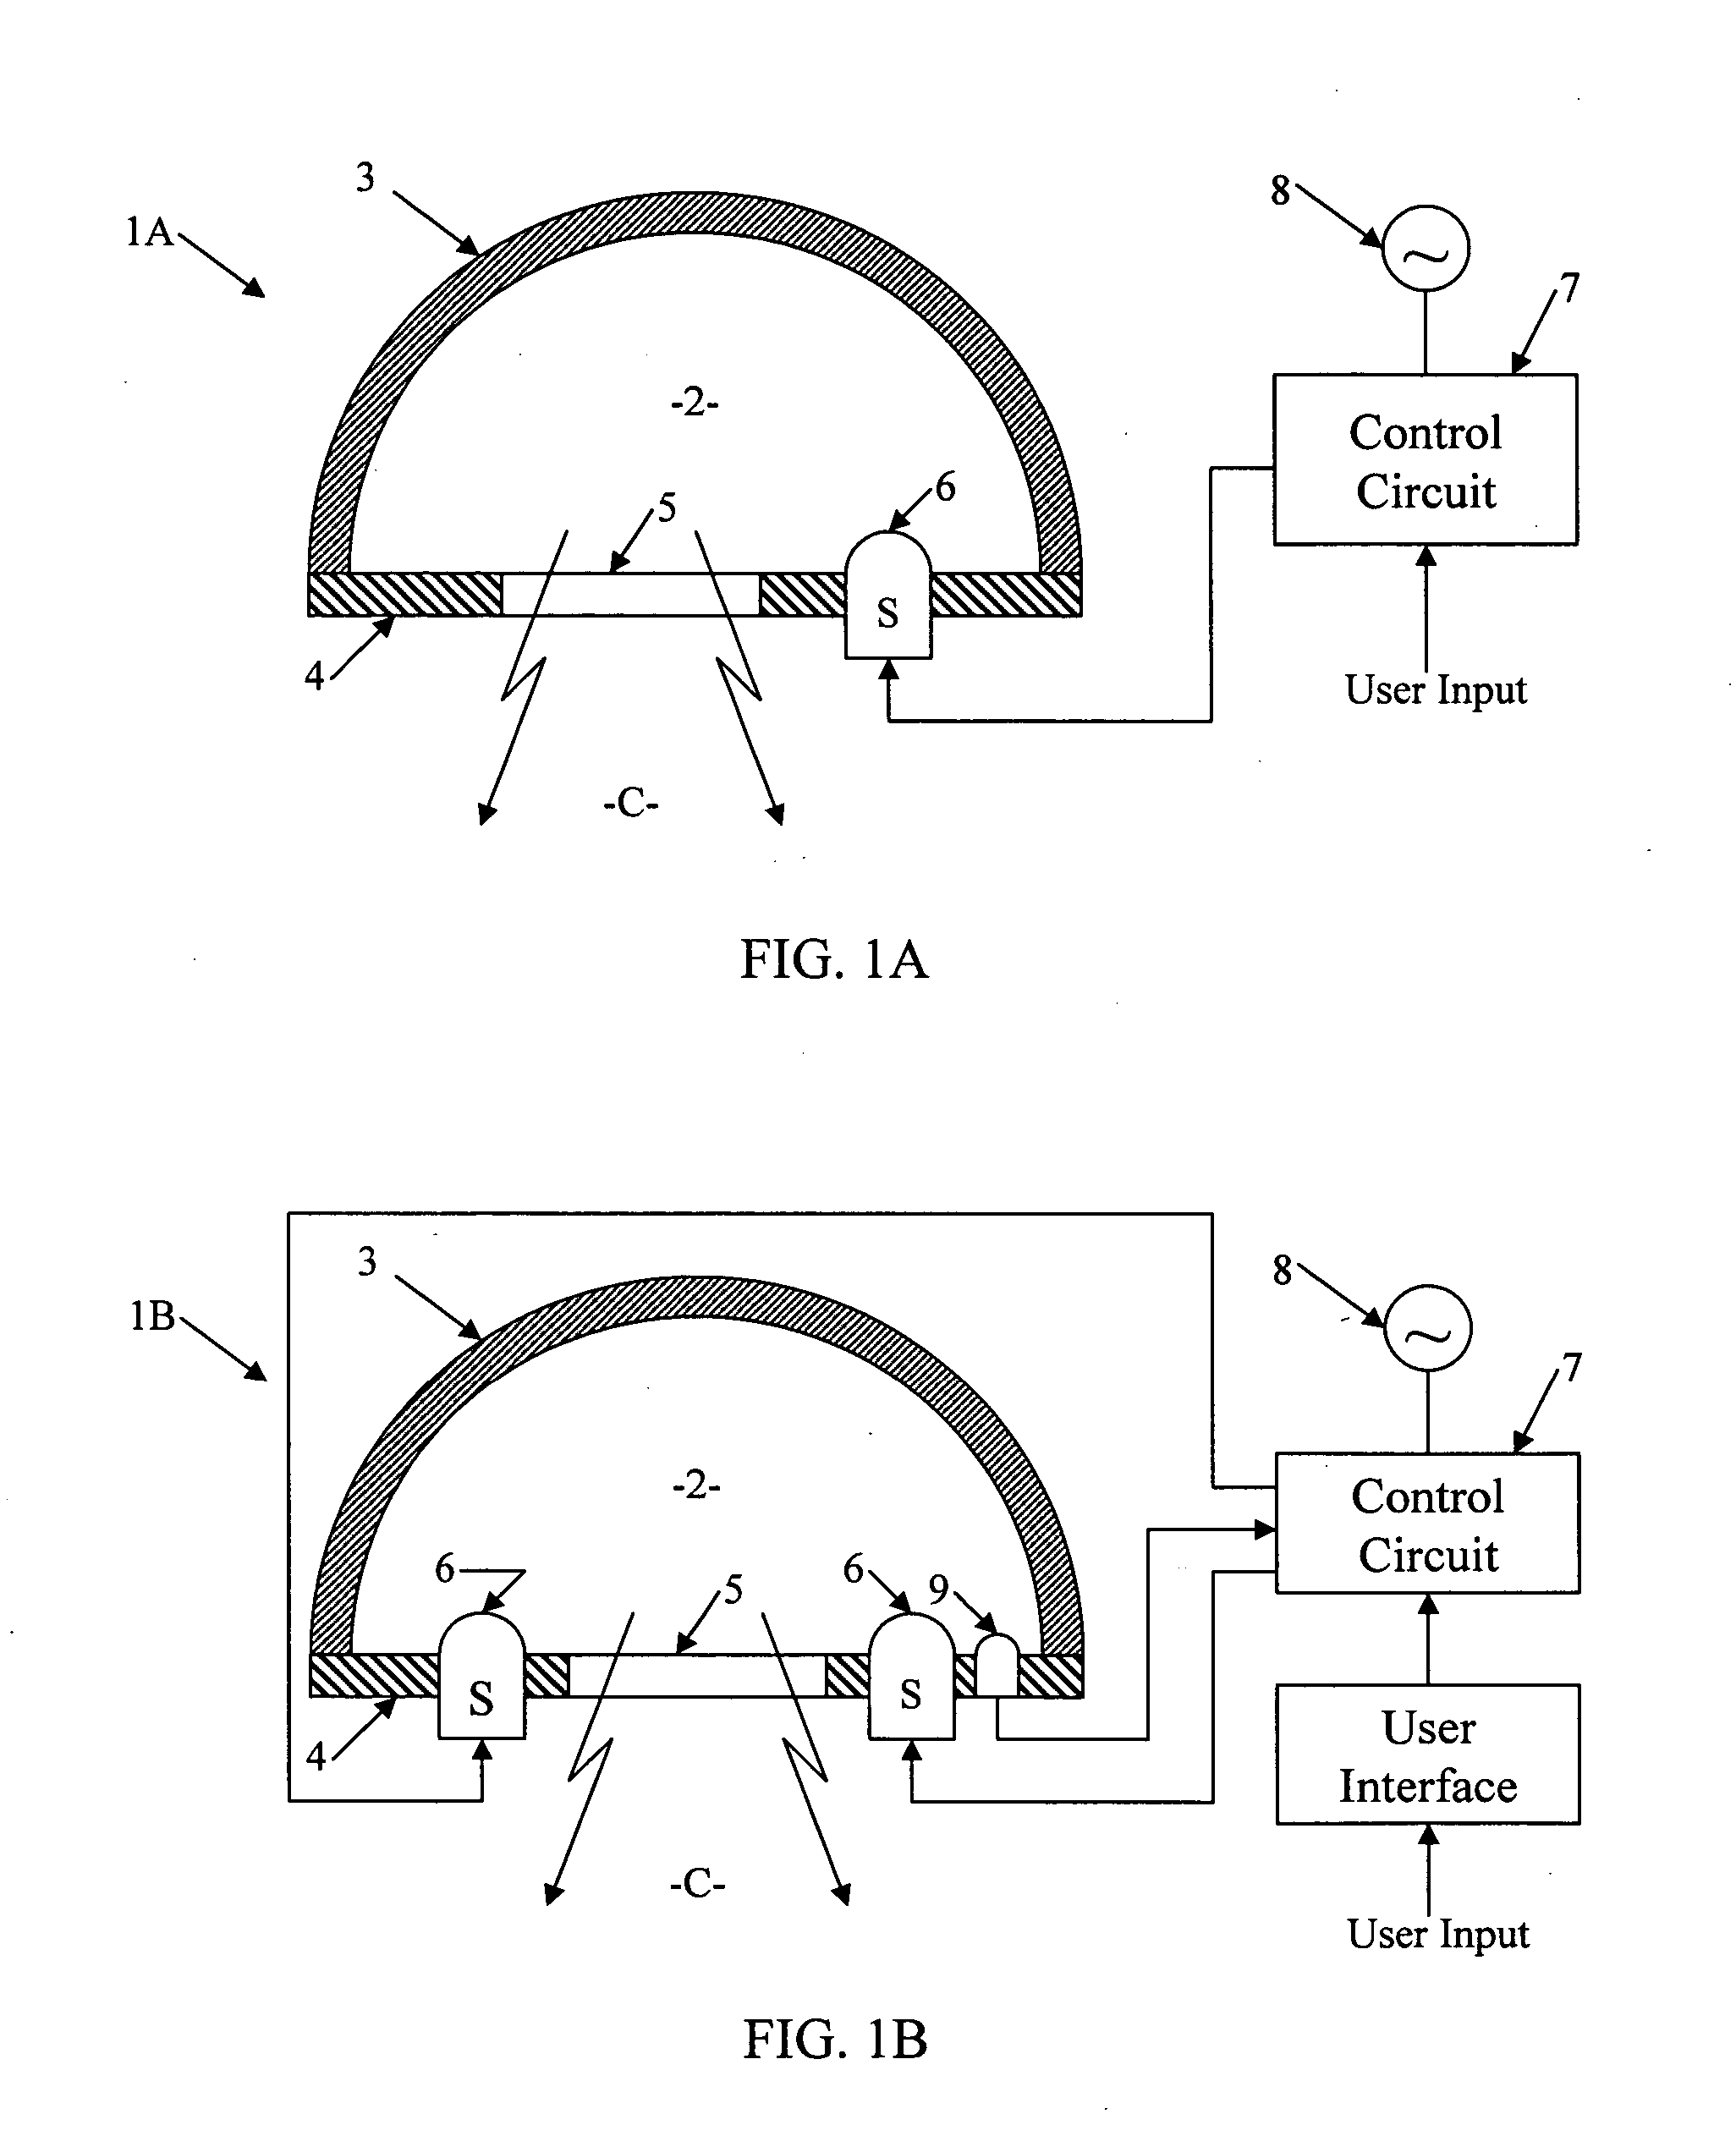 Conversion of solid state source output to virtual source